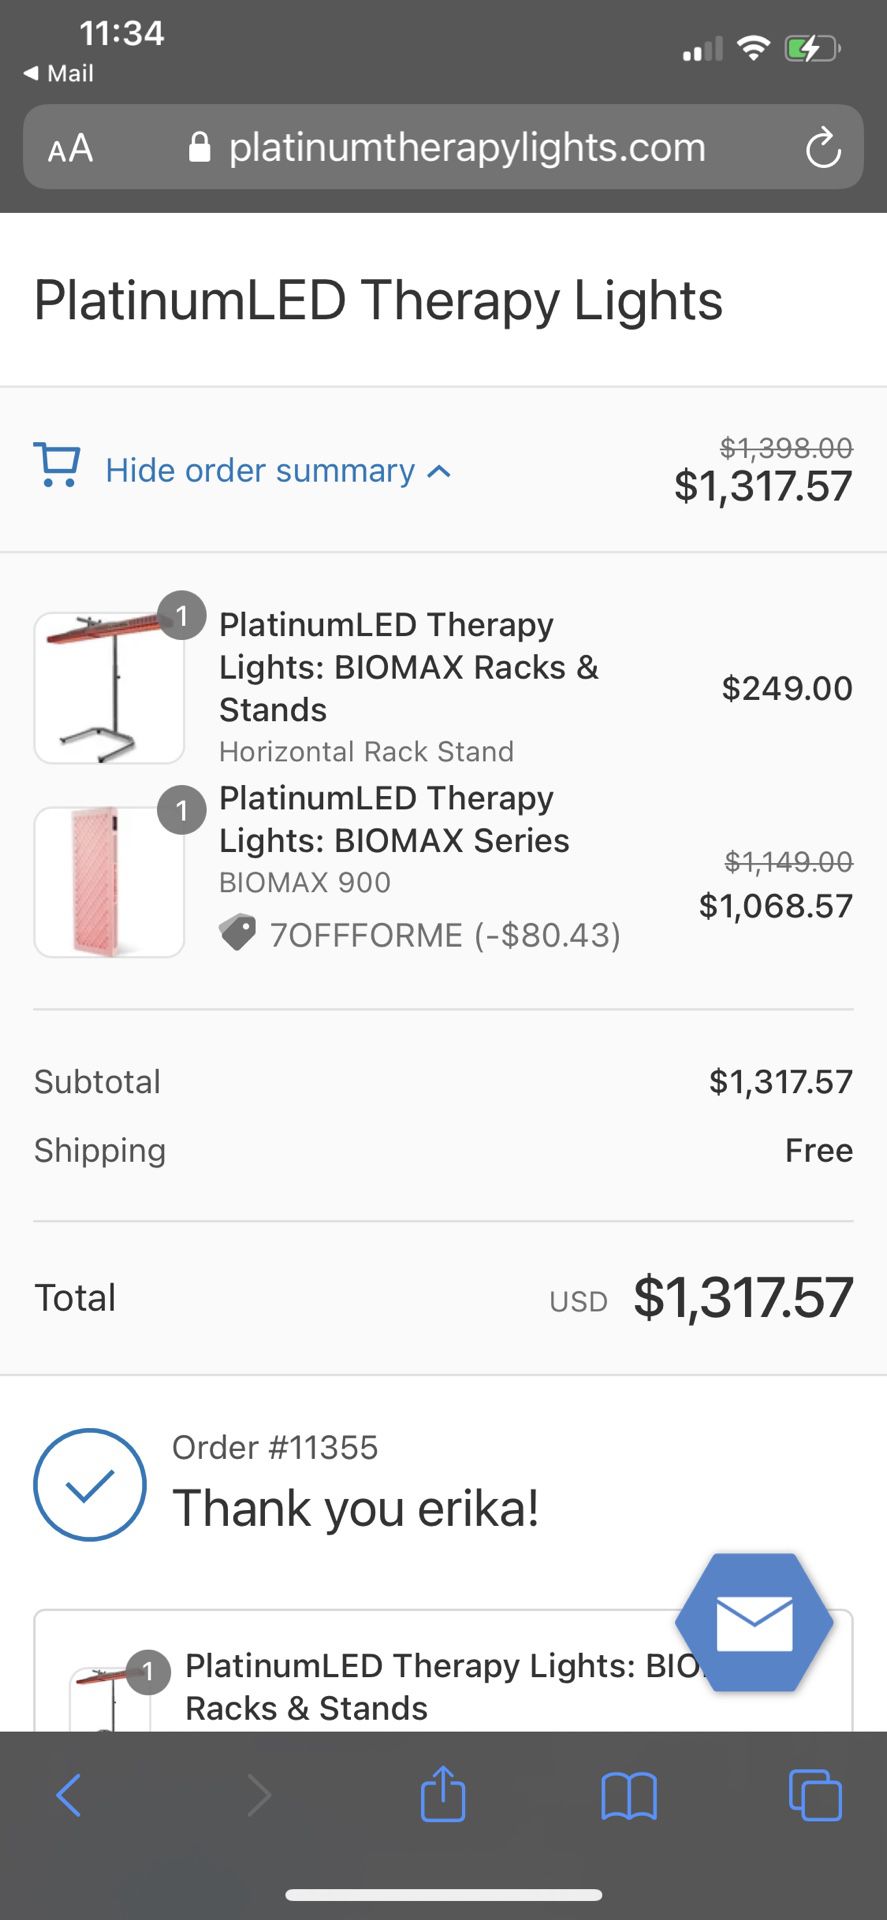 PlatinumLED Therapy Lights: BIOMAX Series $800